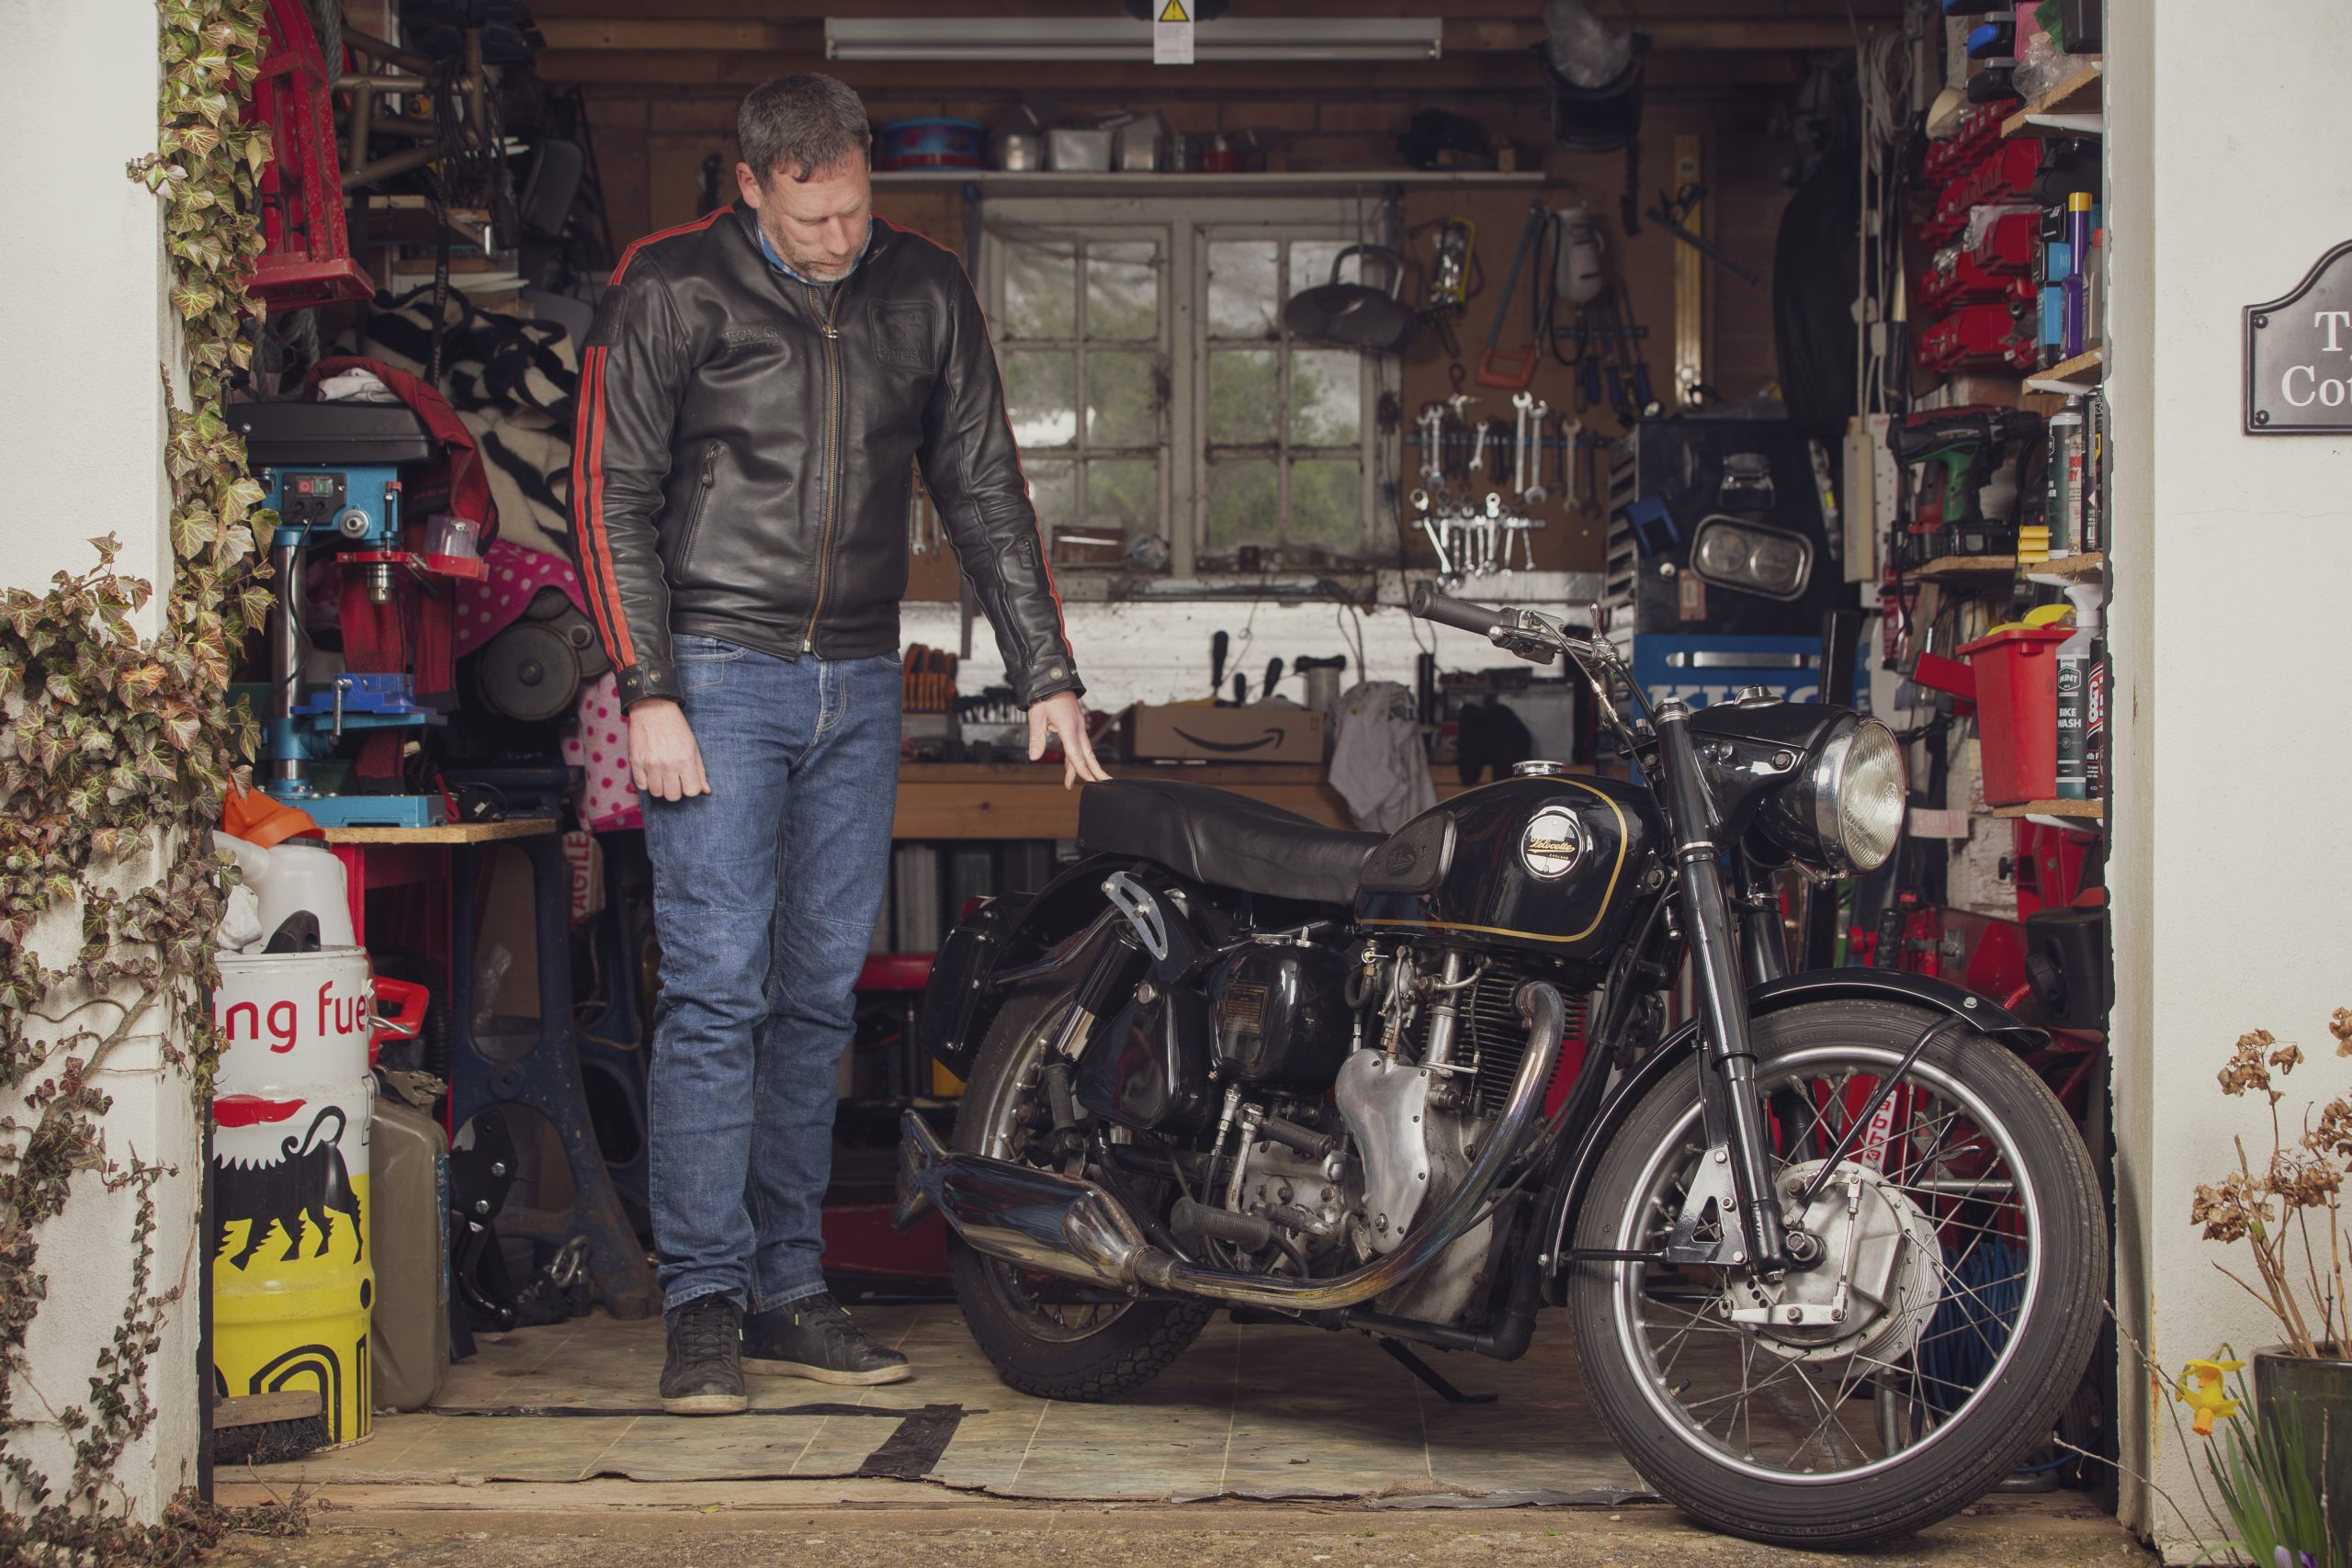 A classic British bike is one of life's great pleasures – when it's working